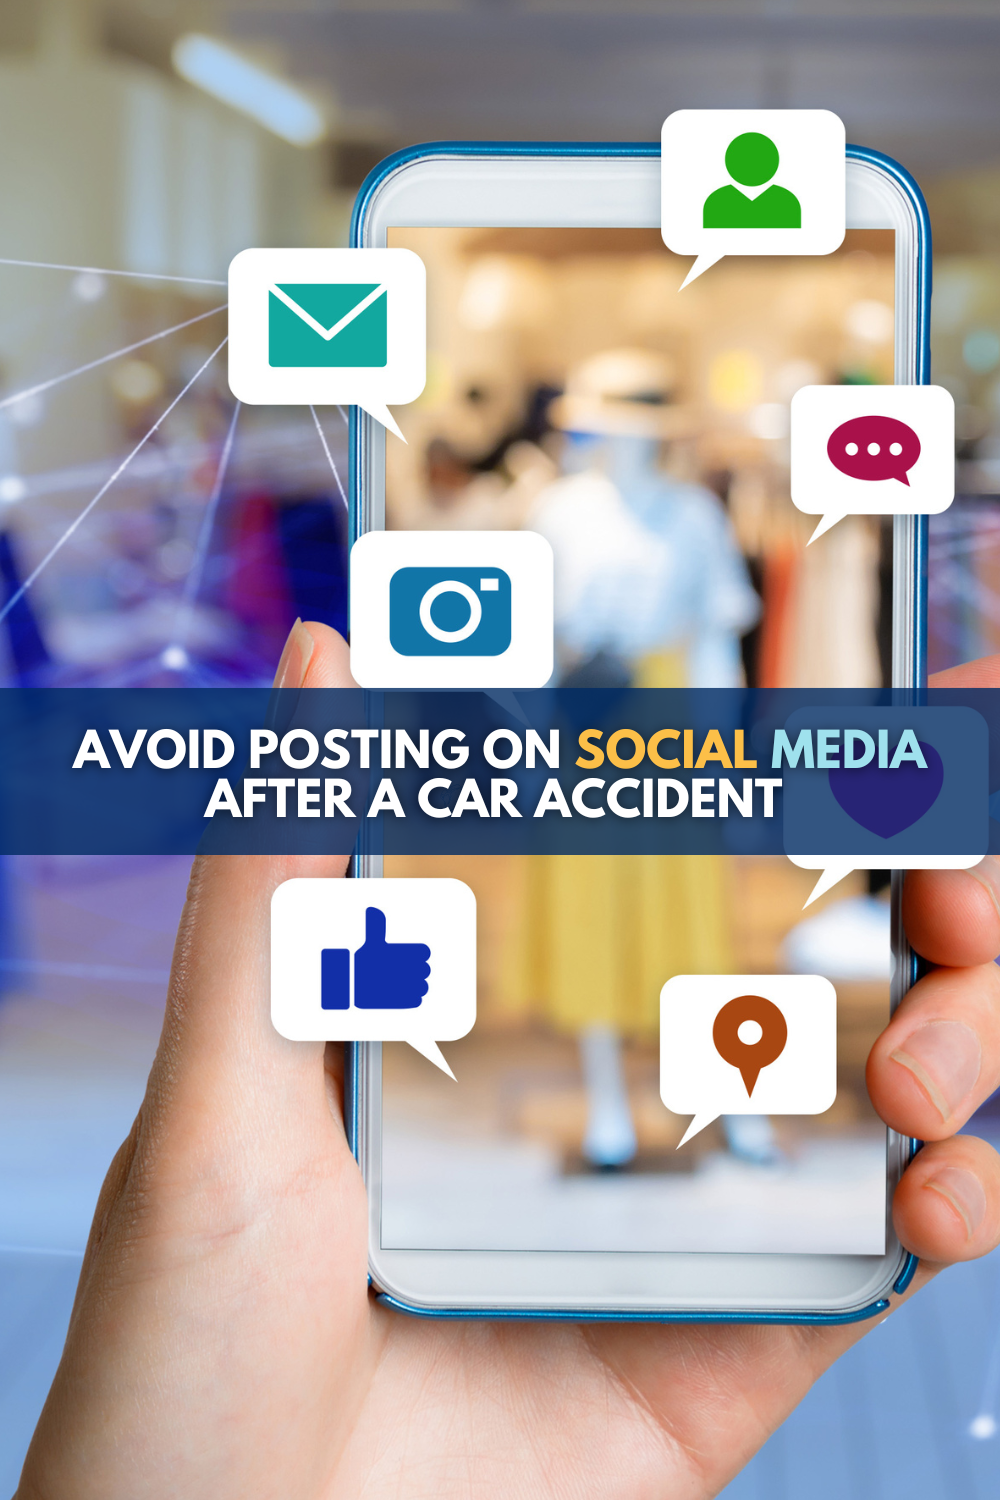 Posting On Social Media After A Car Accident: Avoid It